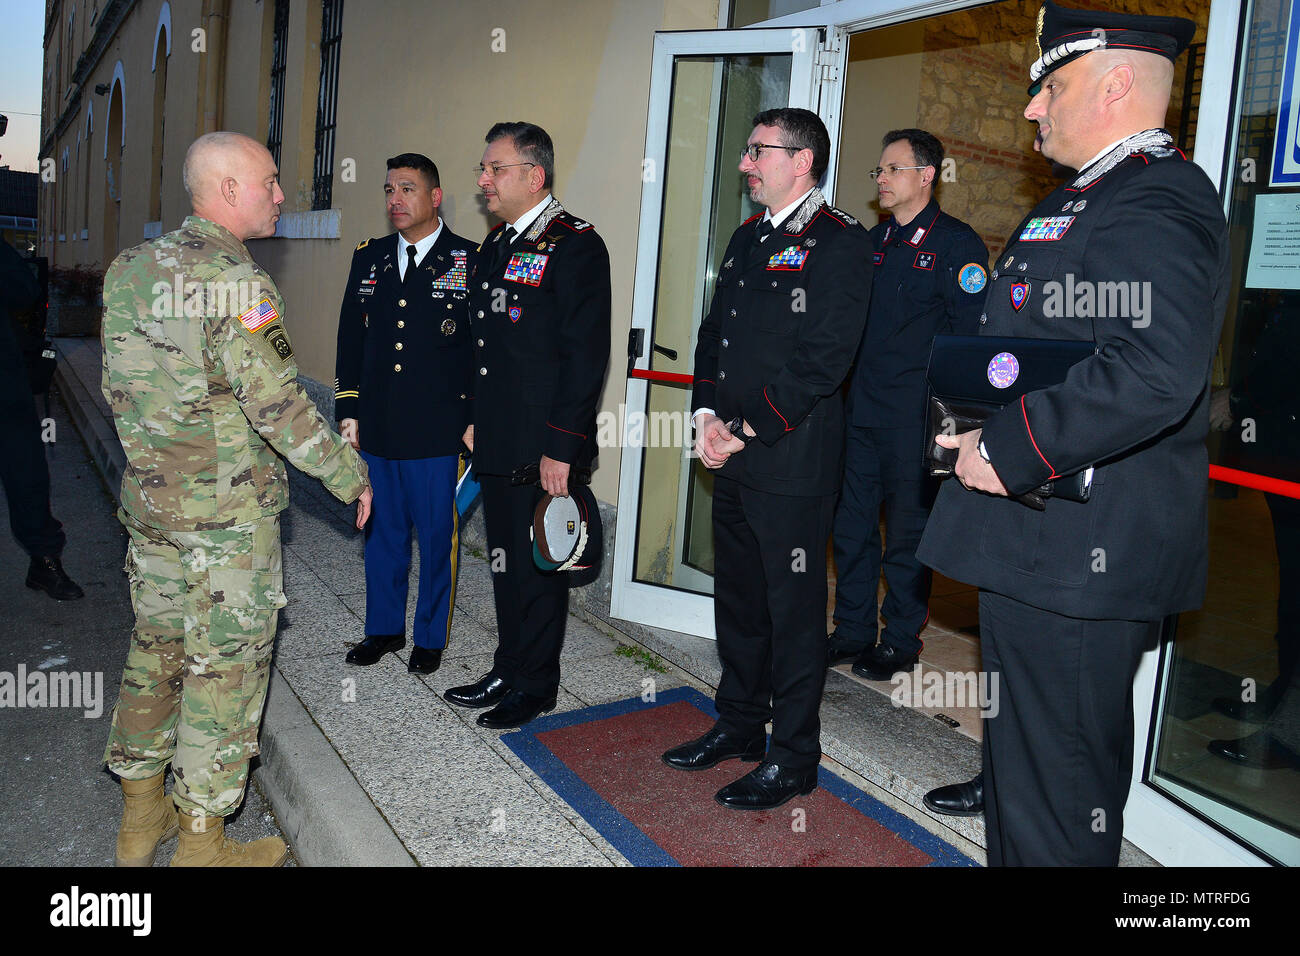 Lt. Gen. Charles D. Luckey (left), Commanding General U.S. Army Reserve Command, thanks for visit at the Center of Excellence for Stability Police Units (CoESPU), at U.S. Army Col. Darius S. Gallegos, (CoESPU) deputy director Brig. Gen. Giovanni Pietro Barbano, (CoESPU) director, Col Pietro Carrozza, (CoESPU),Carabinieri HQ Chief of plans and Military Police and Col Nicola Mangialavori, (CoESPU) Chief of Special Branch Department ,Vicenza, Italy, January 20, 2017.(U.S. Army Photo by Visual Information Specialist Paolo Bovo/released) Stock Photo